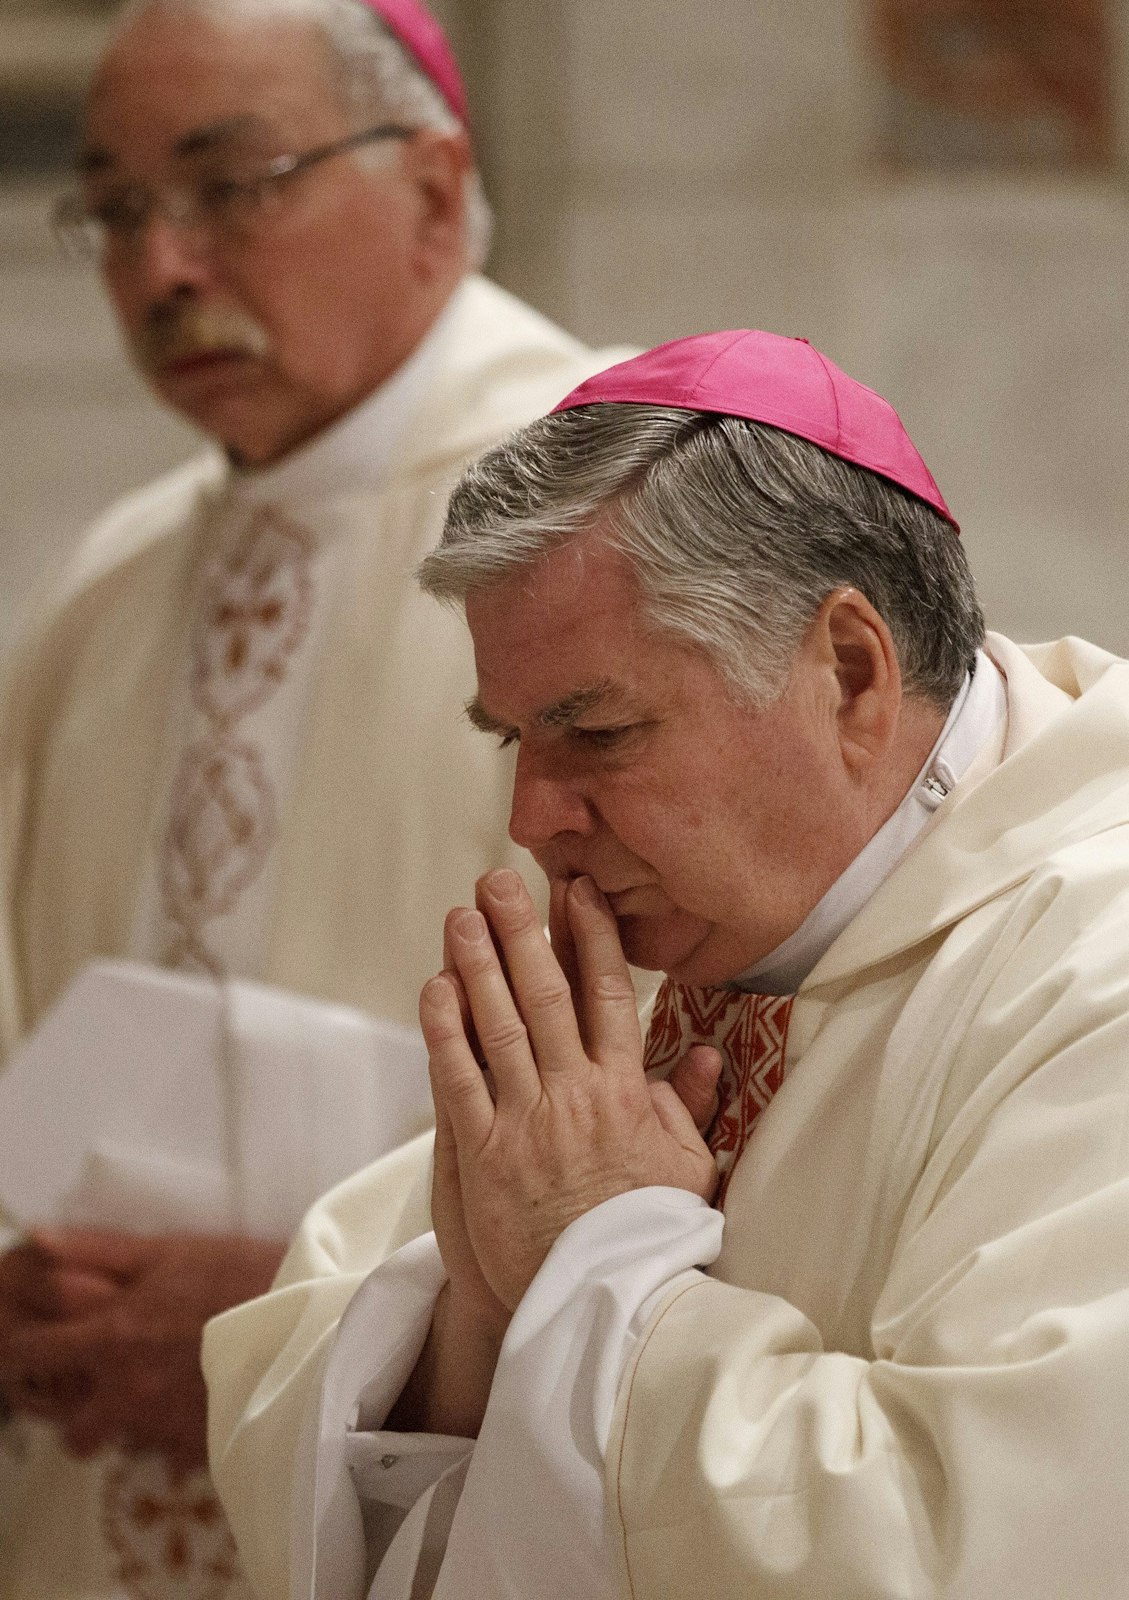 Bishop Paul J. Bradley of Kalamazoo, Mich., prays during a 2012 Mass concelebrated with bishops from Michigan and Ohio on their "ad limina" visits to the Vatican at the tomb of Blessed John Paul II in St. Peter's Basilica. (CNS photo/Paul Haring)